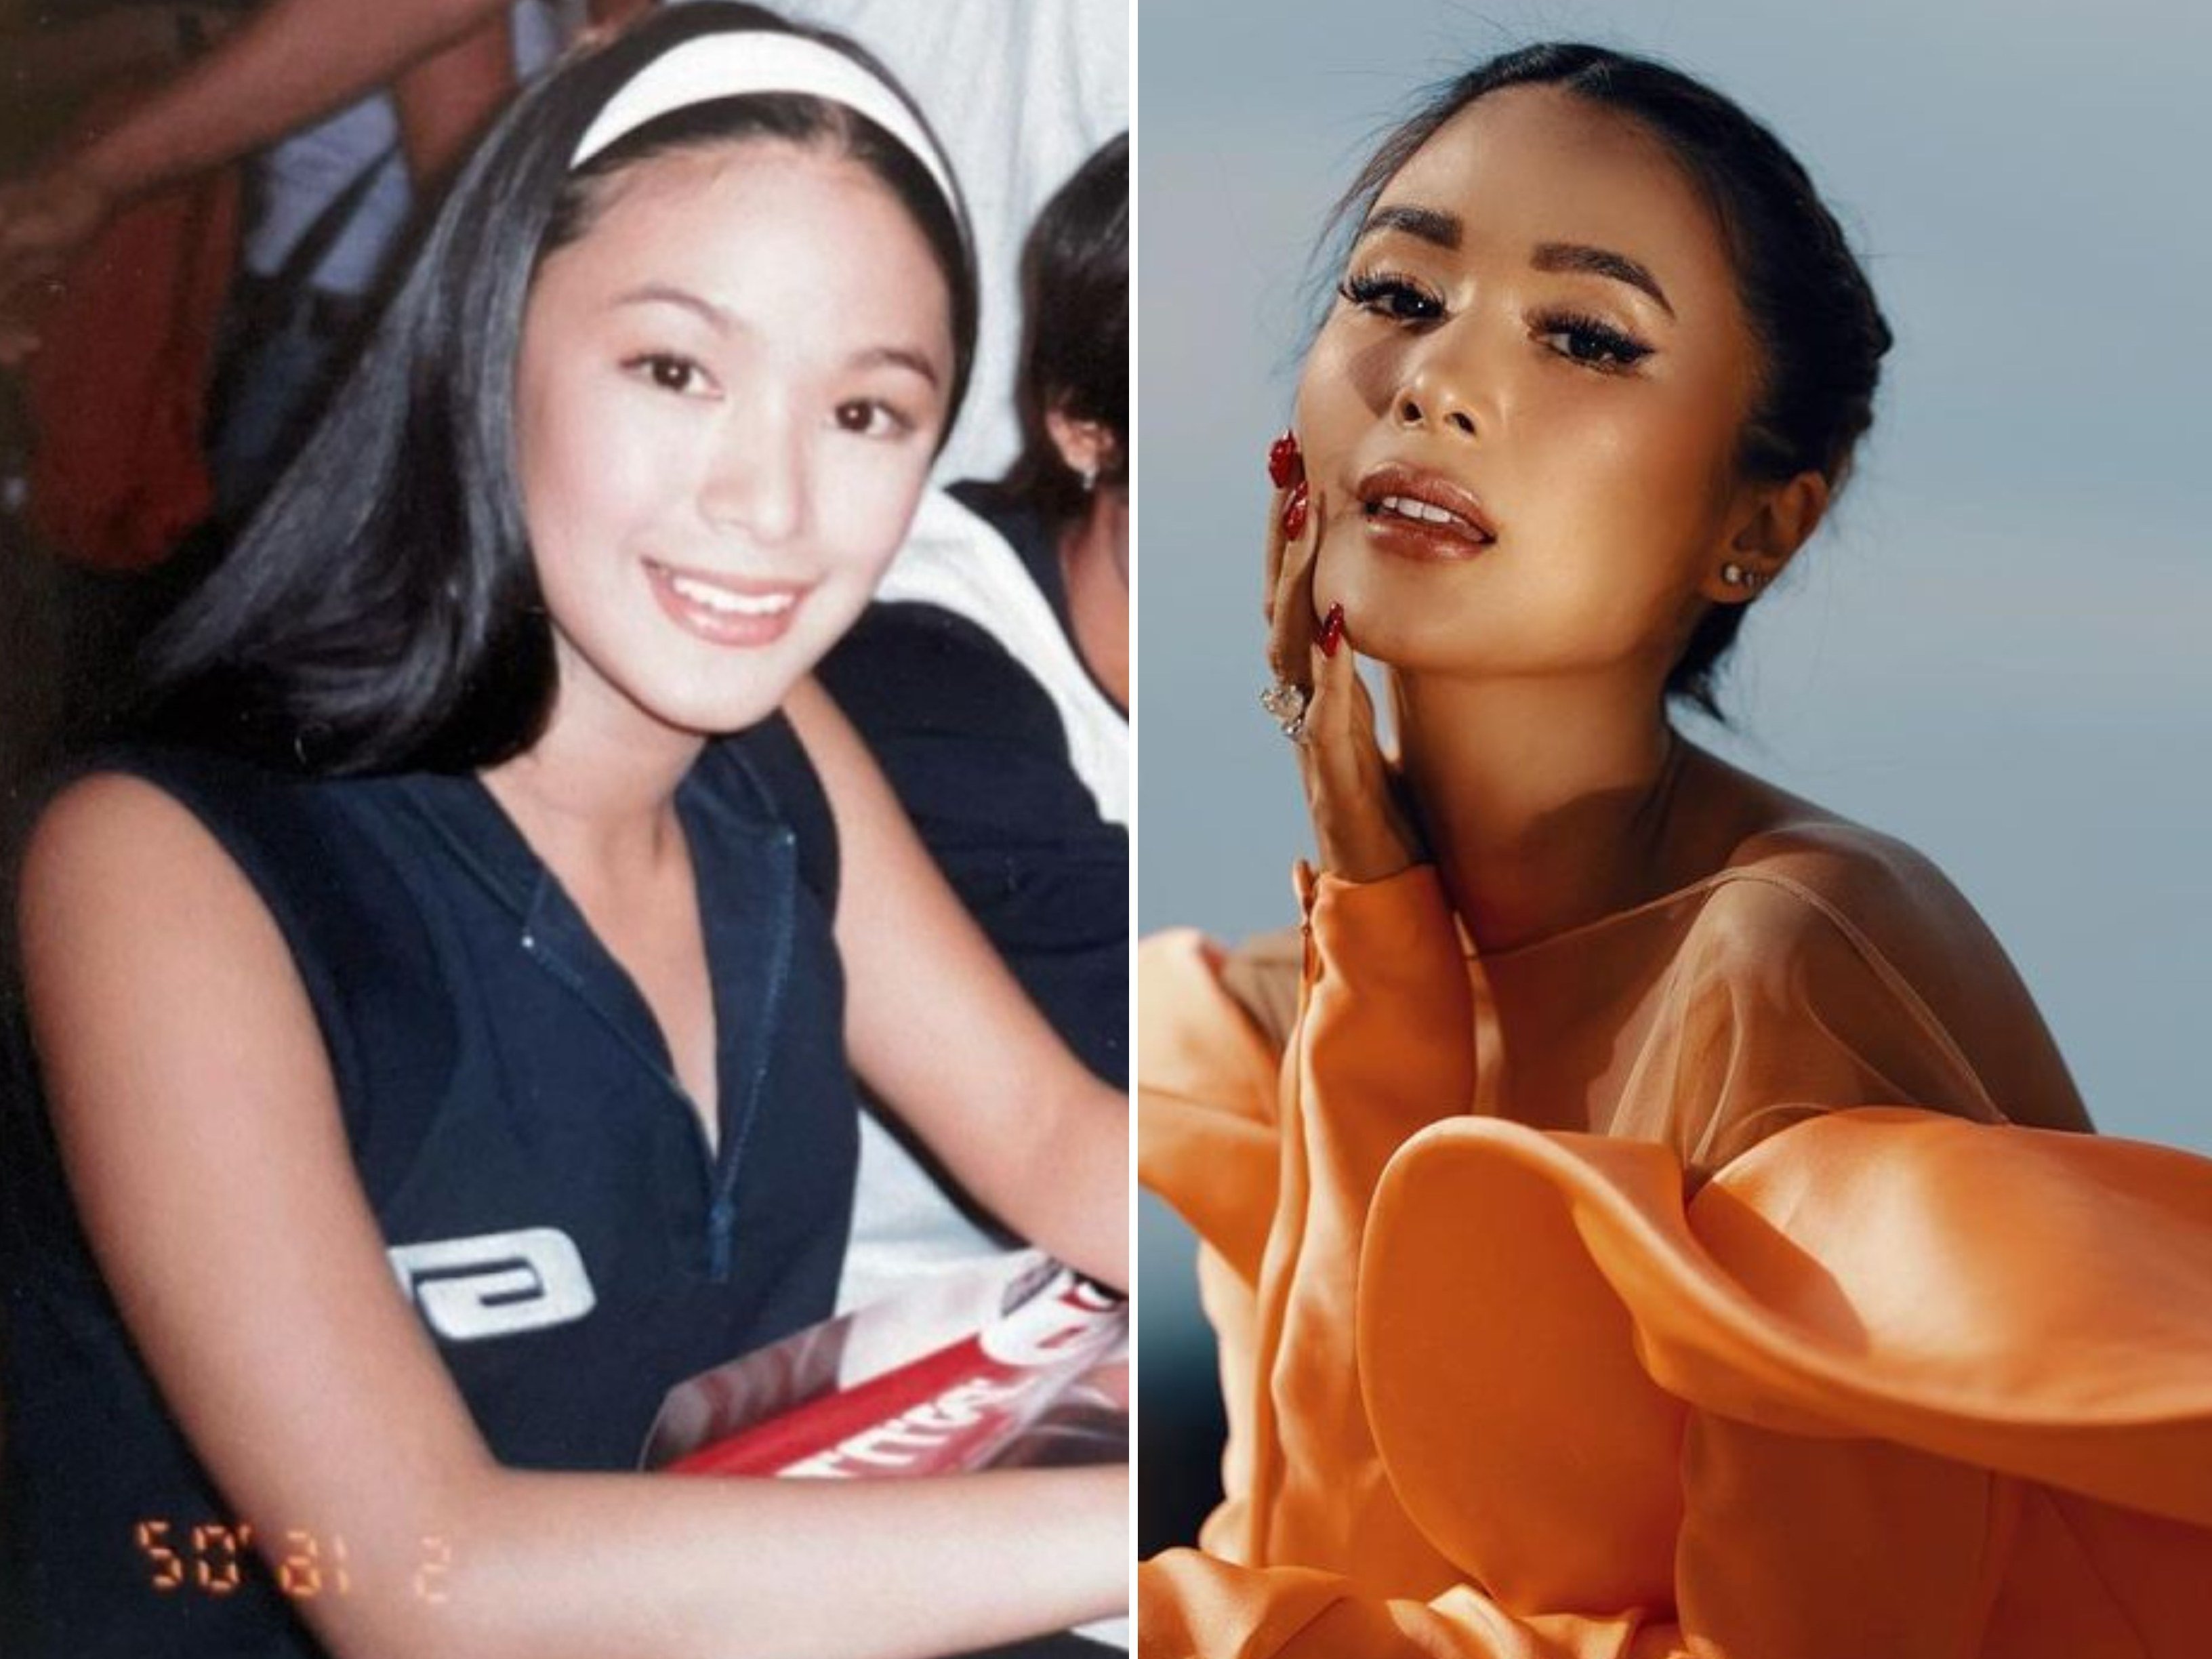 Filipino fashionista Heart Evangelista has some major changes happening in her life right now. Photos: @iamhearte/Instagram